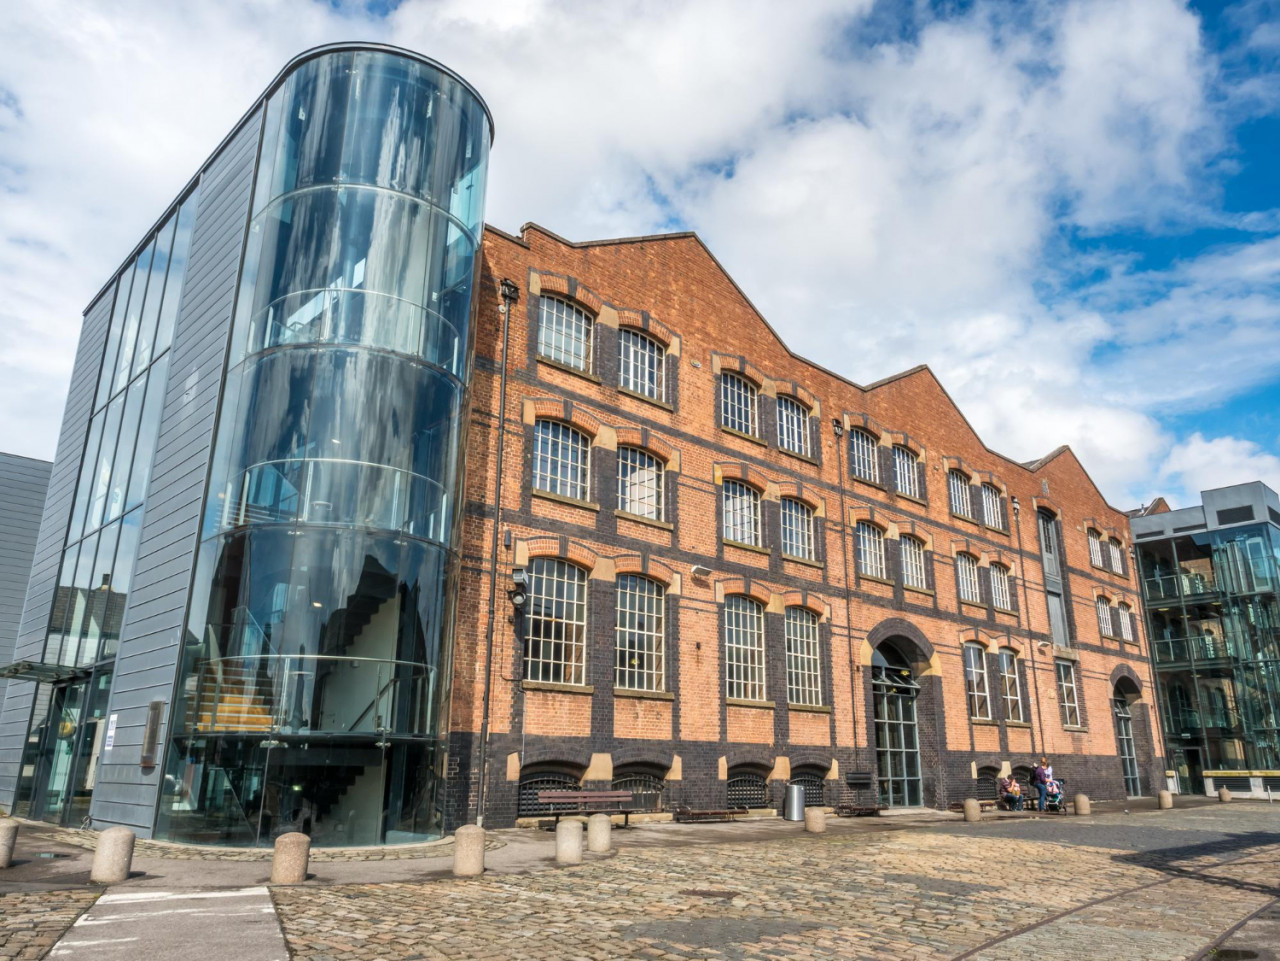 historic buildings museum science industry situated manchester city england